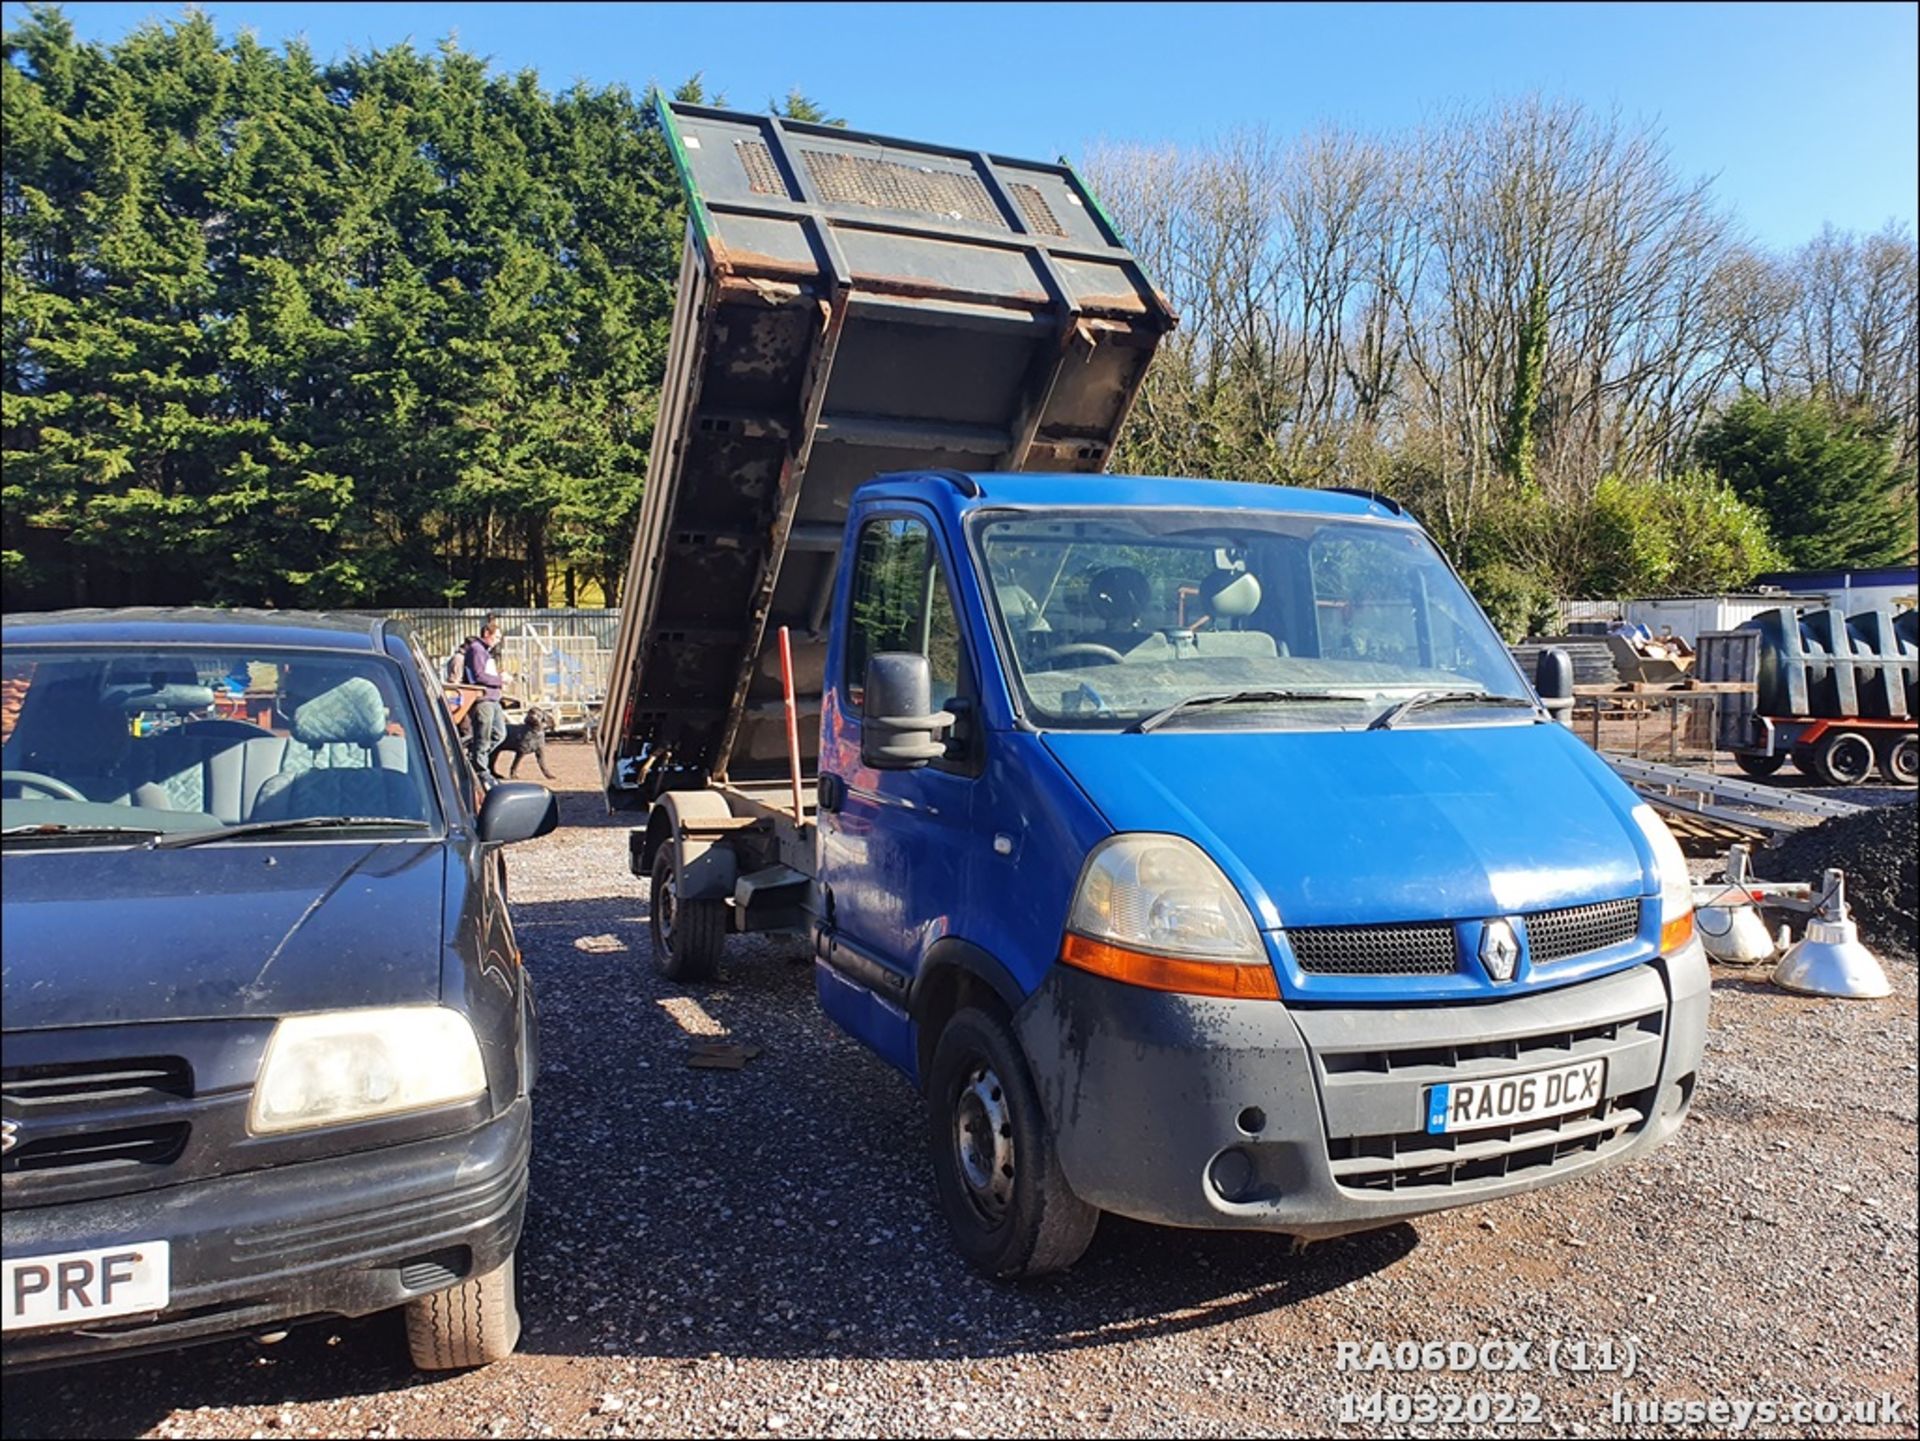 06/06 RENAULT MASTER CCML35 DCI 120 MWB - 2463cc 2dr Tipper (Grey) - Image 12 of 23